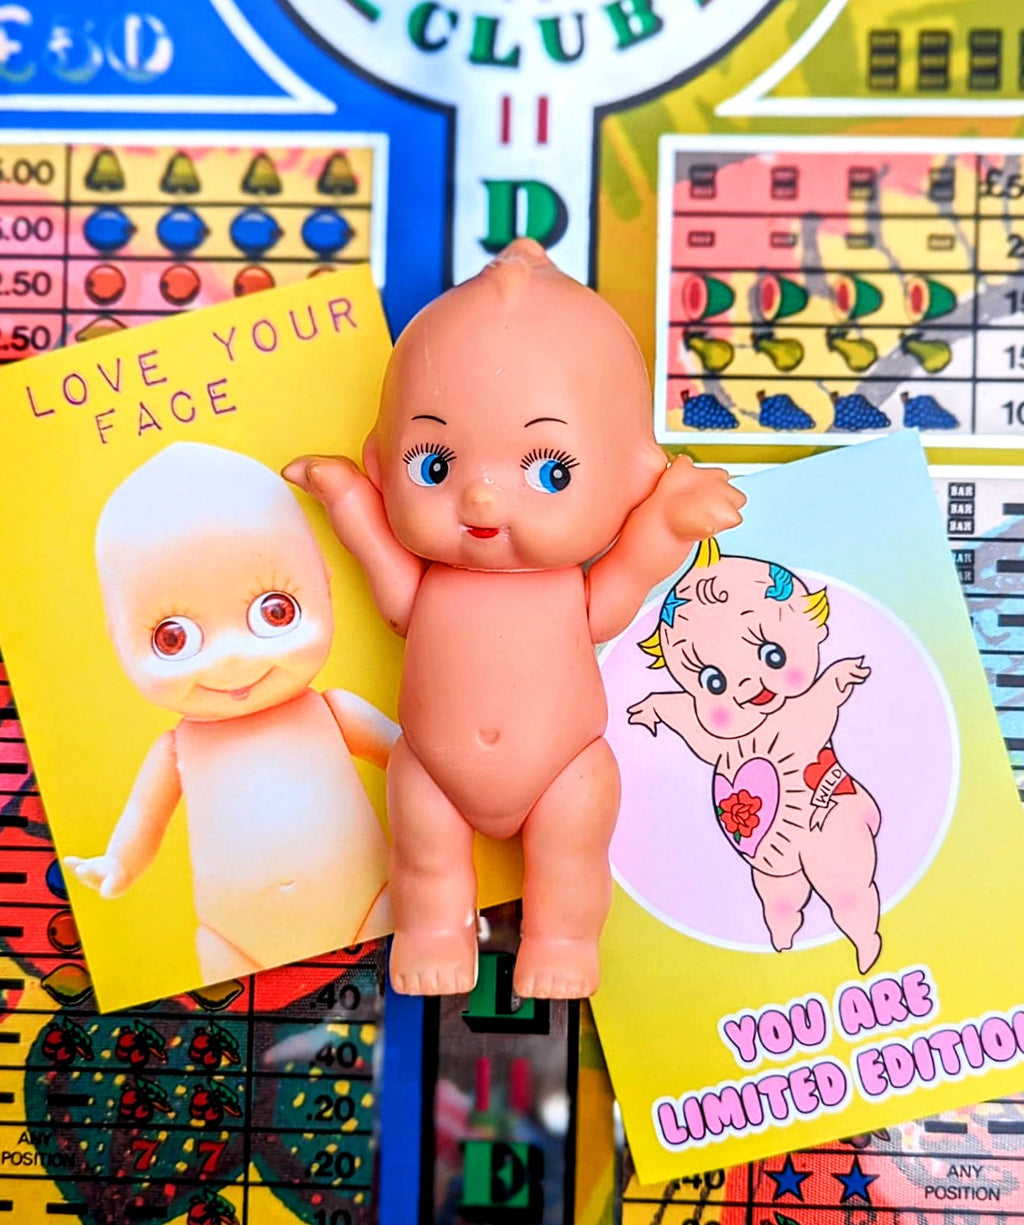 Super kitsch classics! Gorgeous creepy kewpie dolly cards to bring joy to your mad kitsch loving friends and family!!

Set of 2 cards, coloured envelopes.
Bite your Granny cards